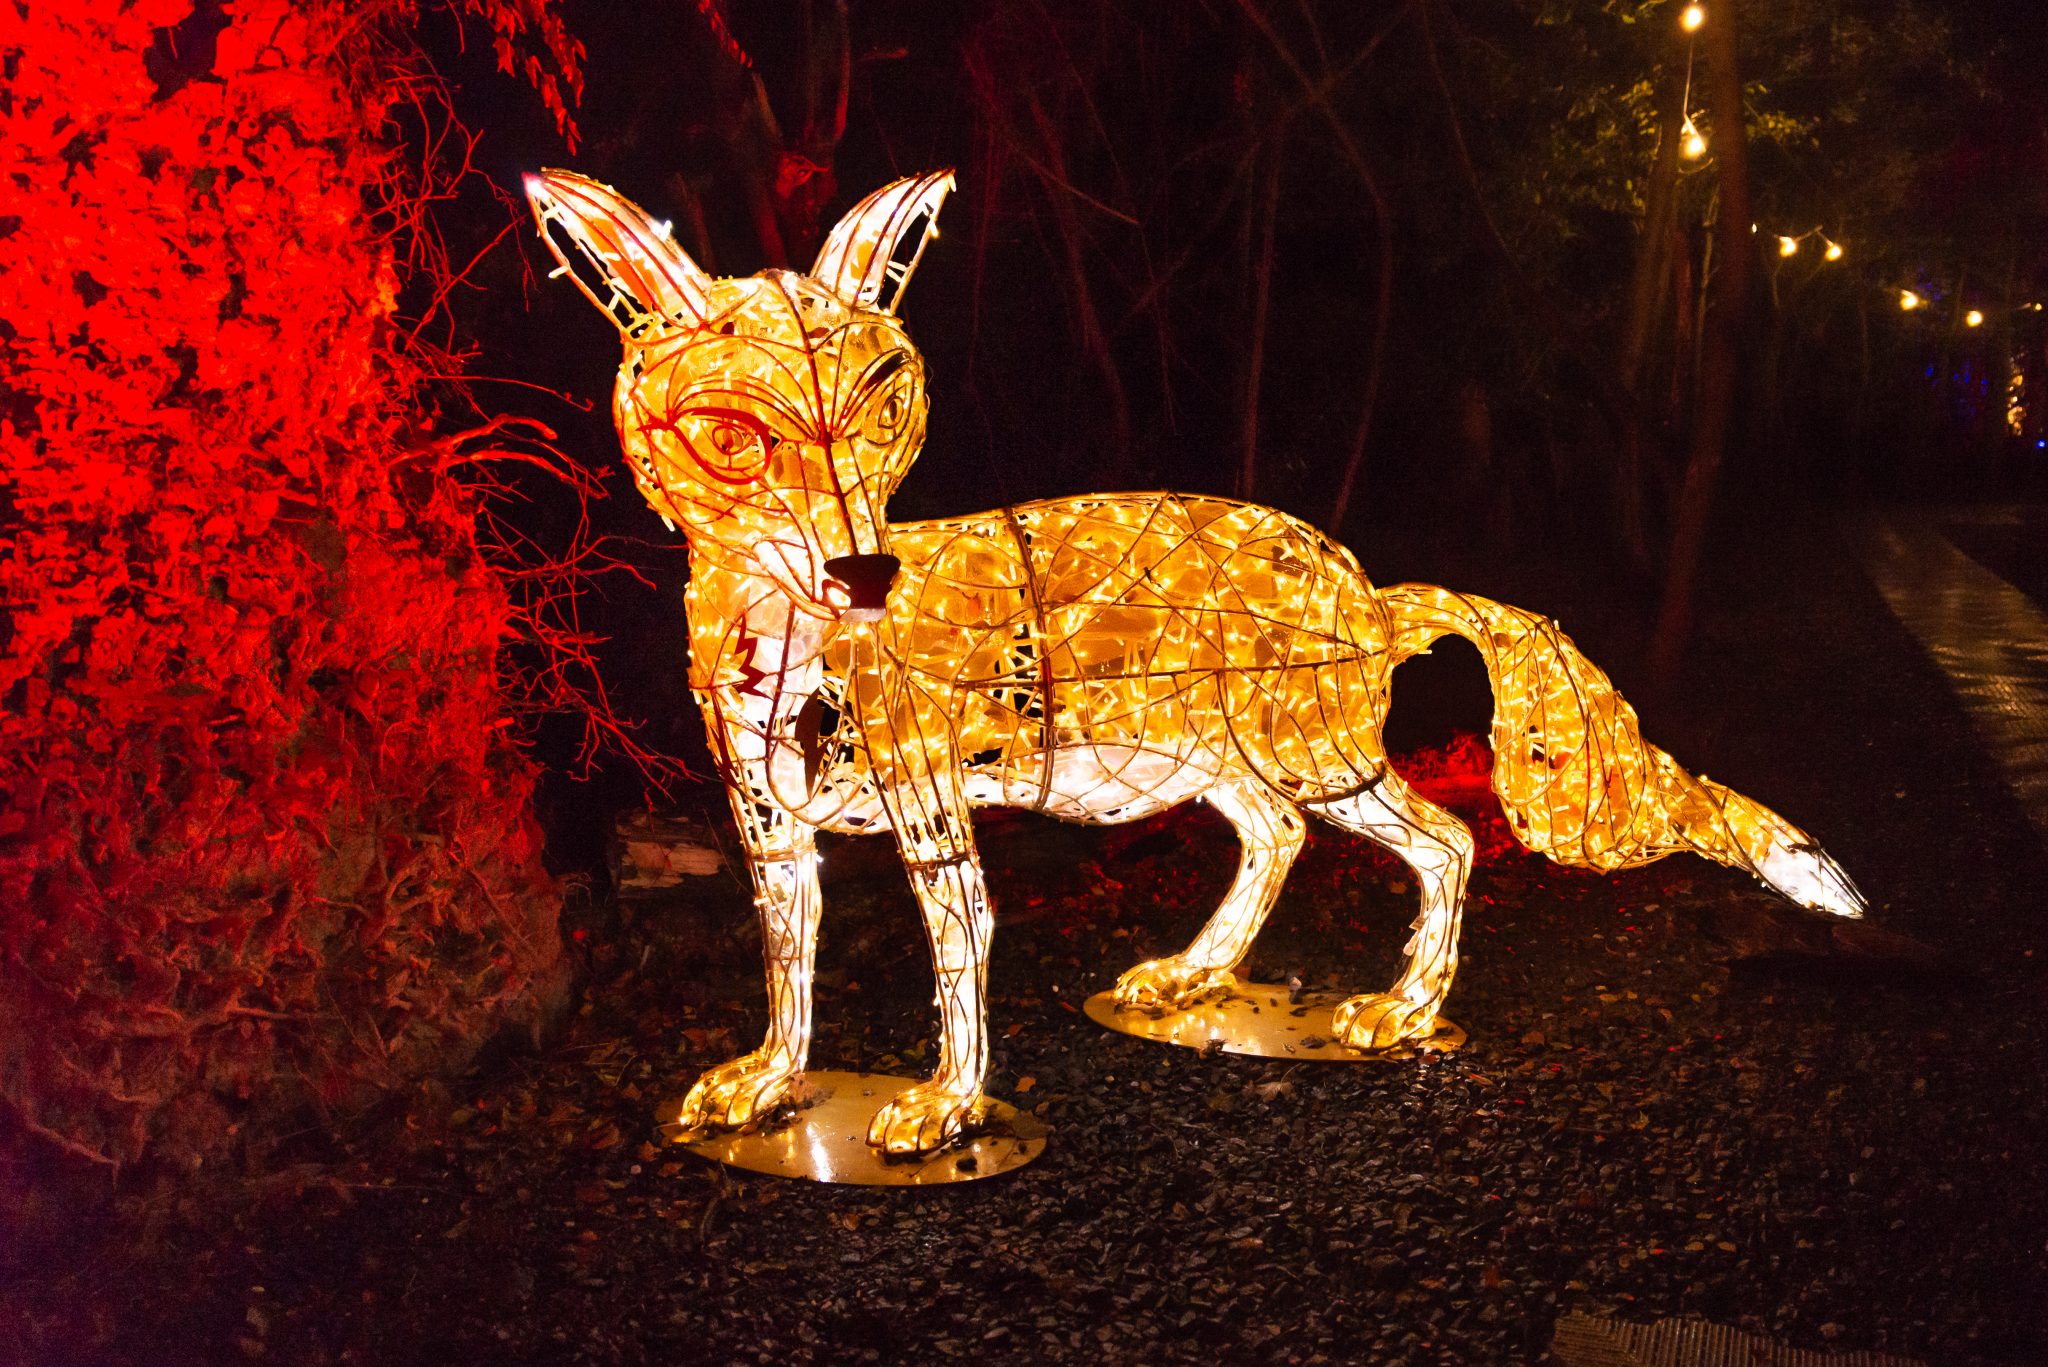 We got a sneak preview of the new Wonderlights trail and it really is WONDERful